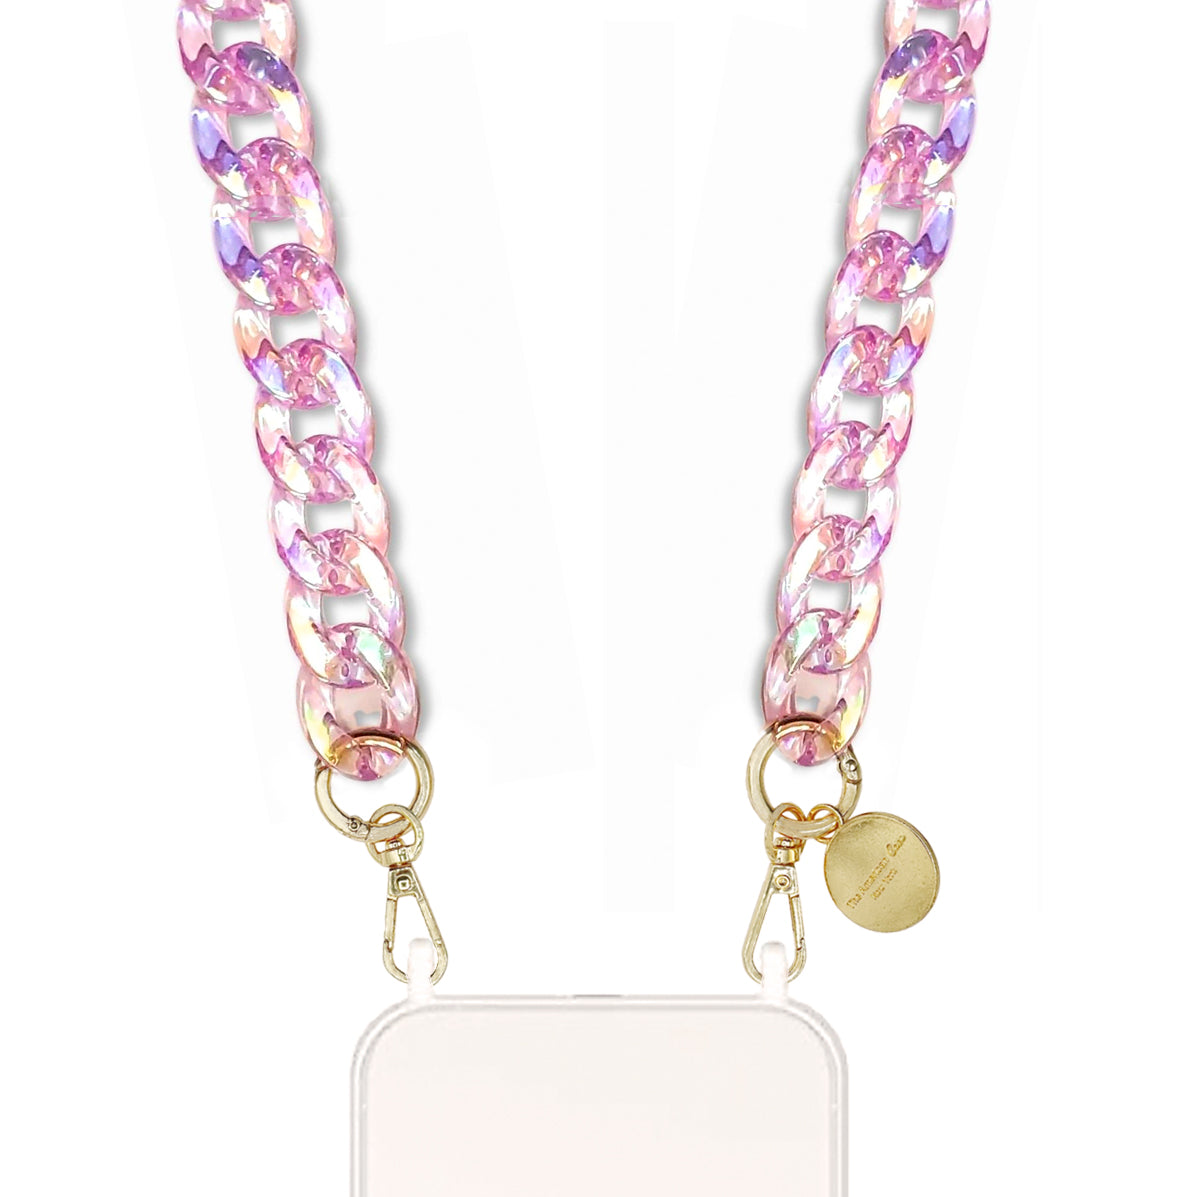 Cyra - Crystal Effect Resin Long Chain with Golden Carabiners